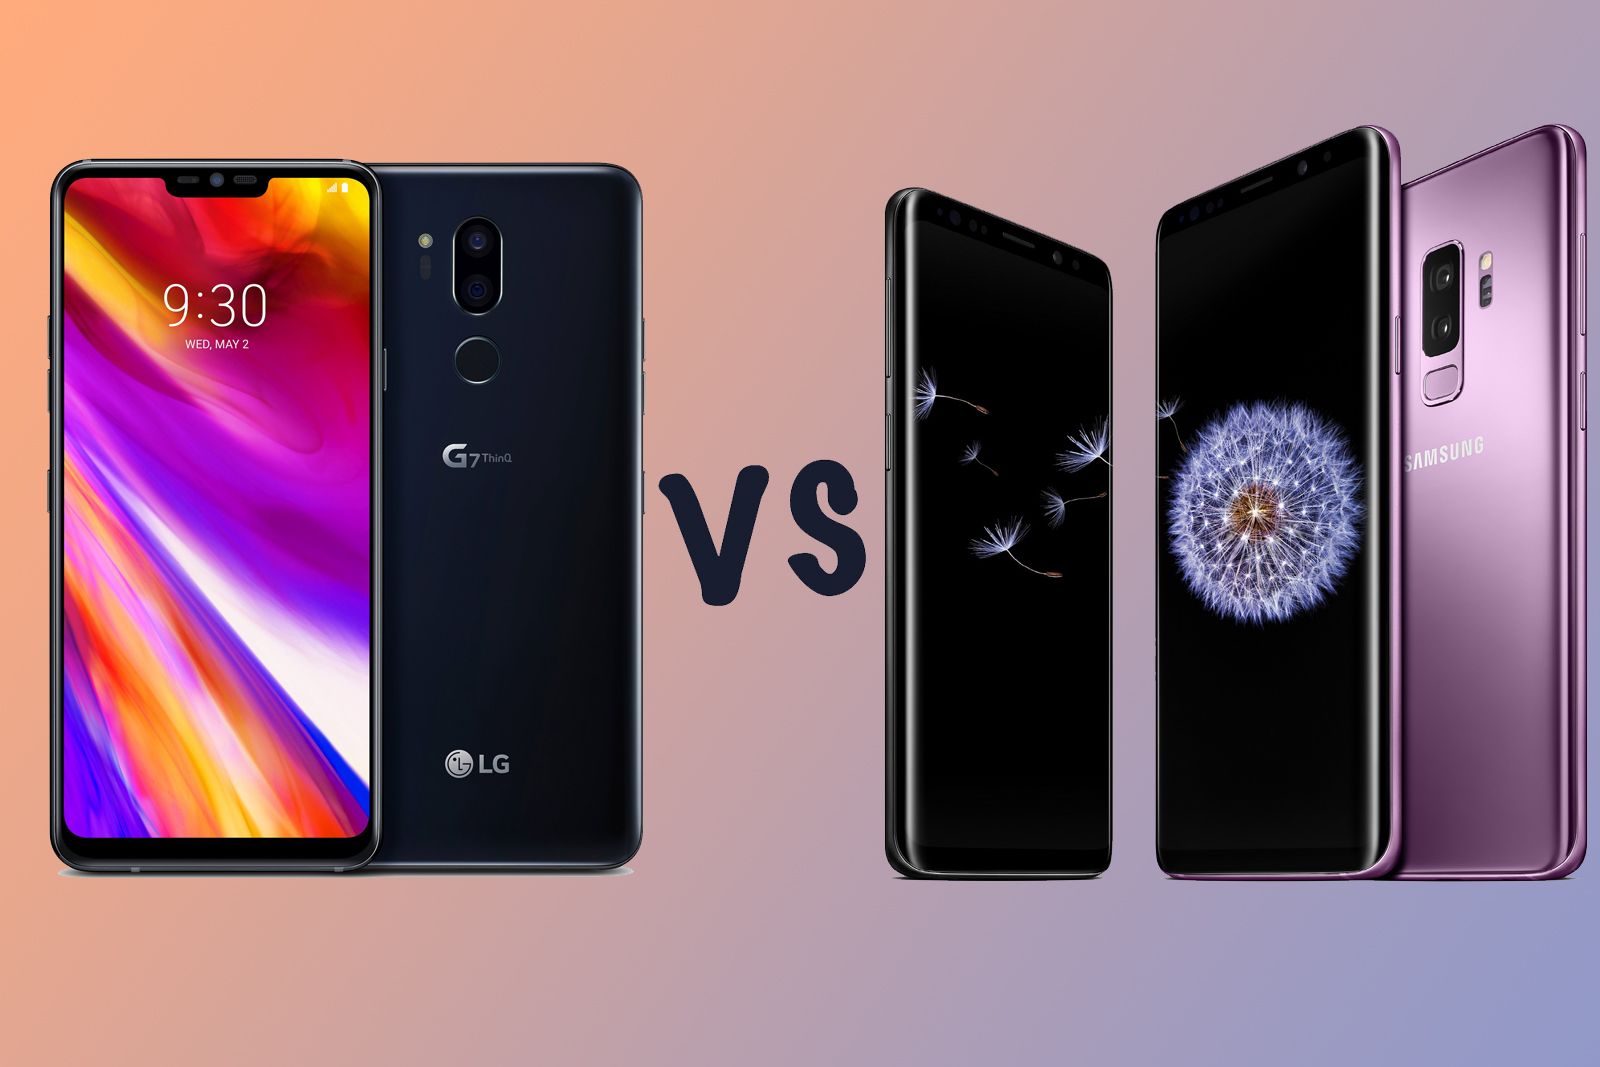 LG G7 ThinQ vs Samsung Galaxy S9 Whats the difference image 1